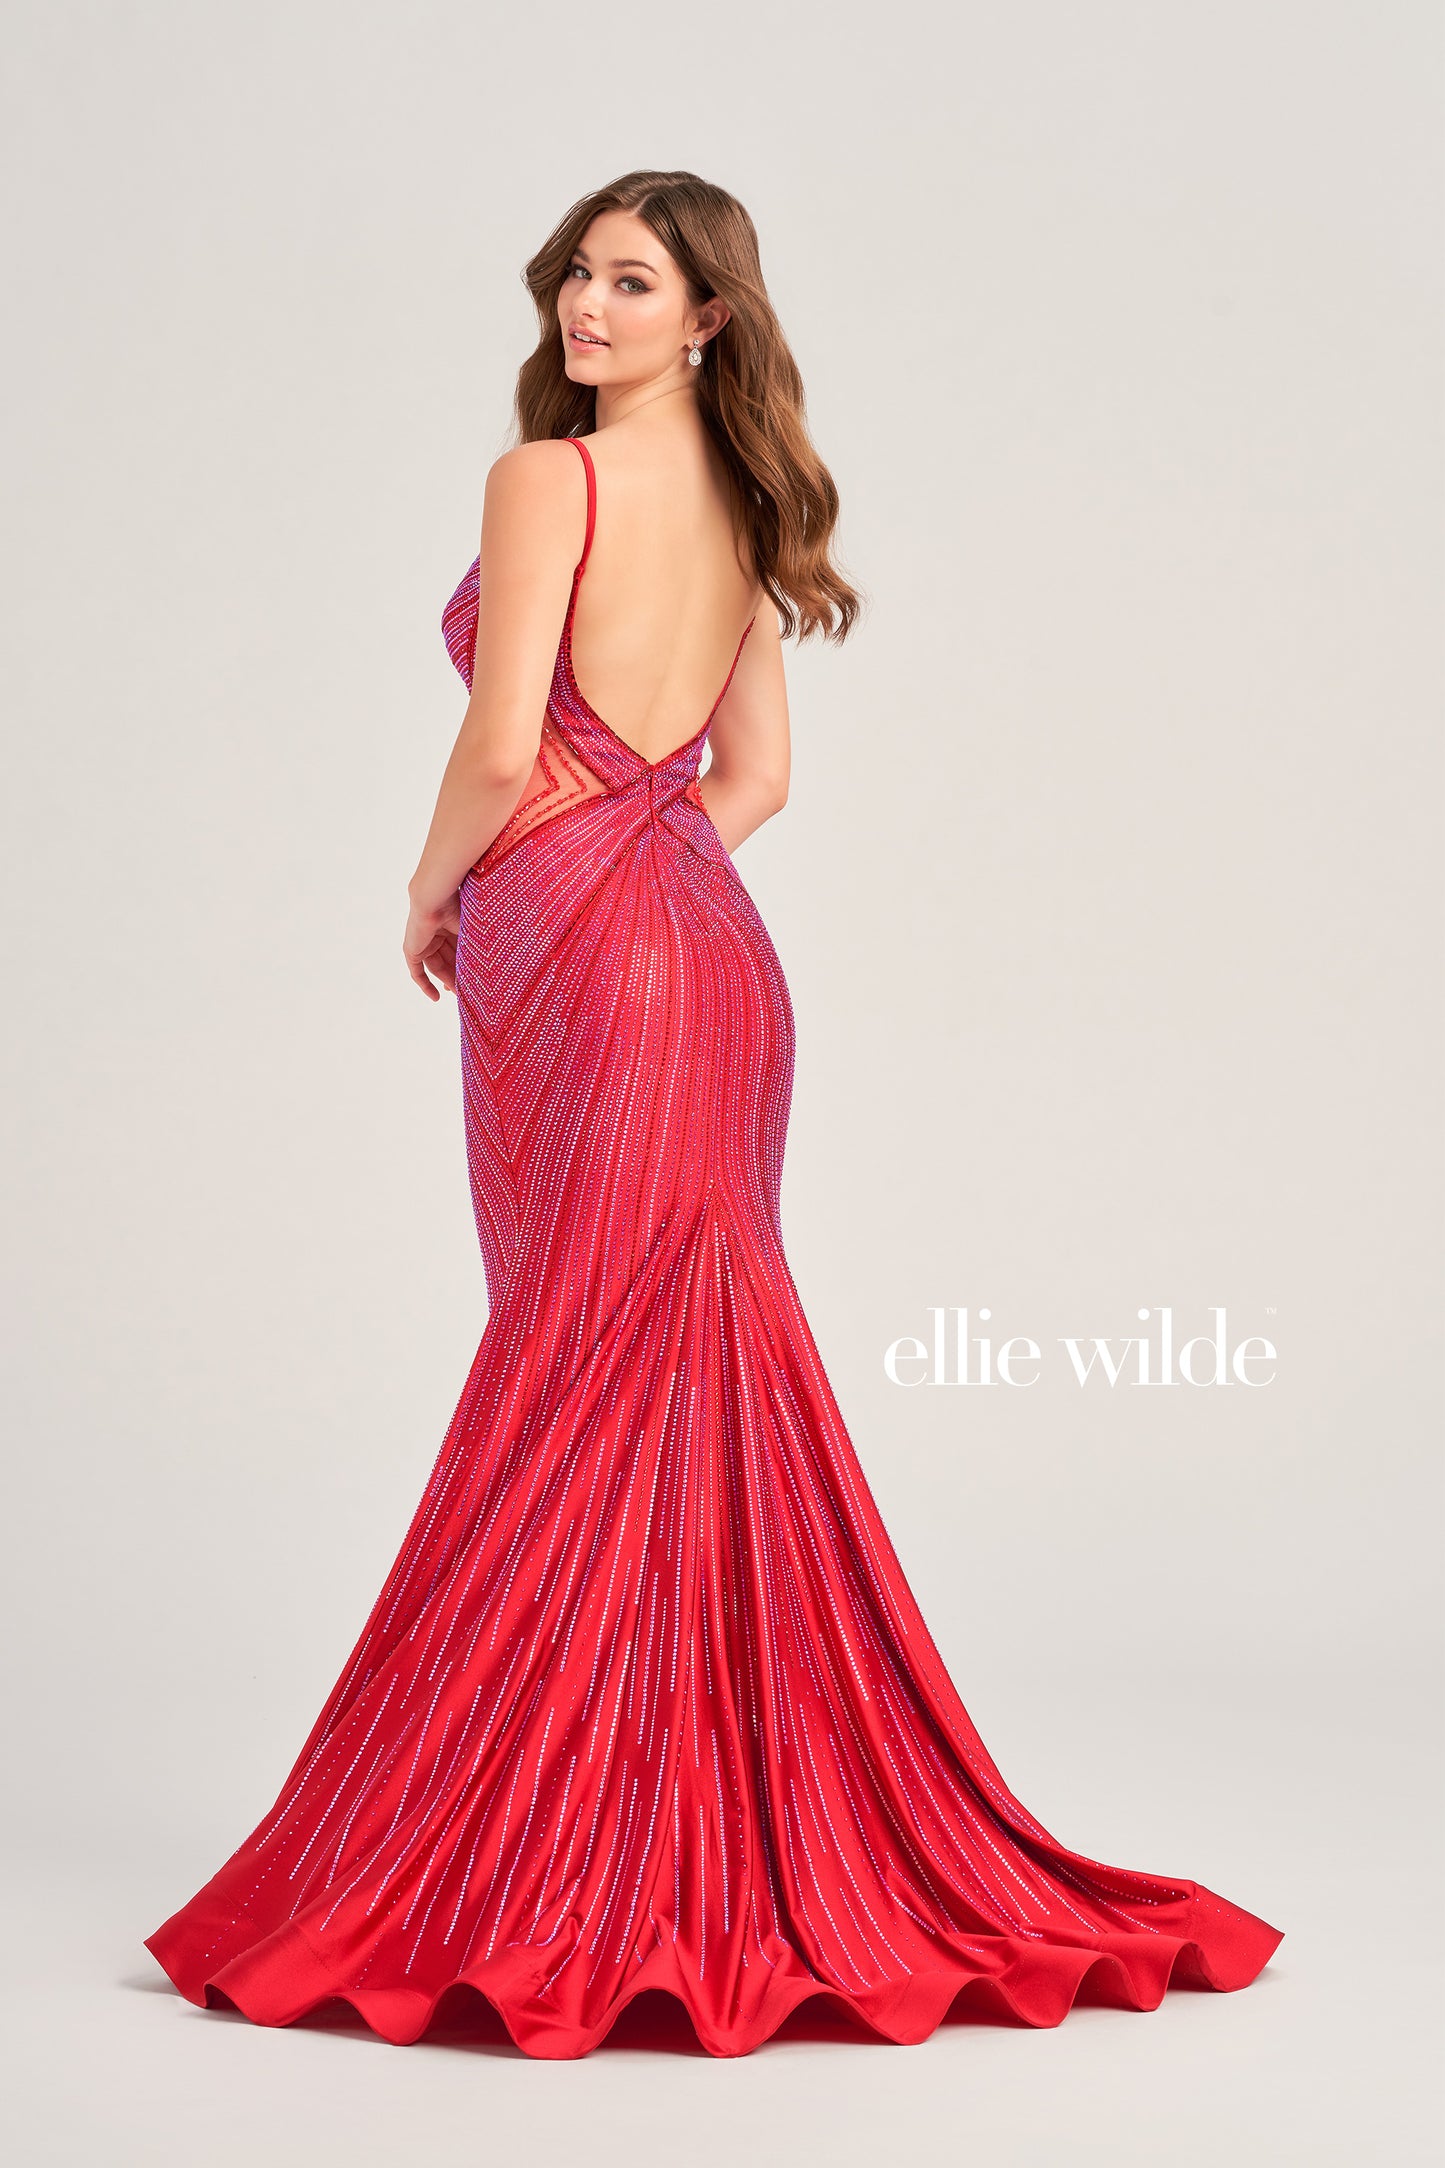 This Ellie Wilde formal dress is perfect for any prom or special event. The fitted crystal jersey construction features sheer mesh cutouts on the sides and a backless mermaid design for a perfect fit. It's finished with a low v-neck for a timeless look.  COLOR: BLACK, LIGHT BLUE, NAVY BLUE, ROYAL BLUE, HOT PINK, RUBY, IRIS, LAVENDER FROST SIZE: 00 - 20